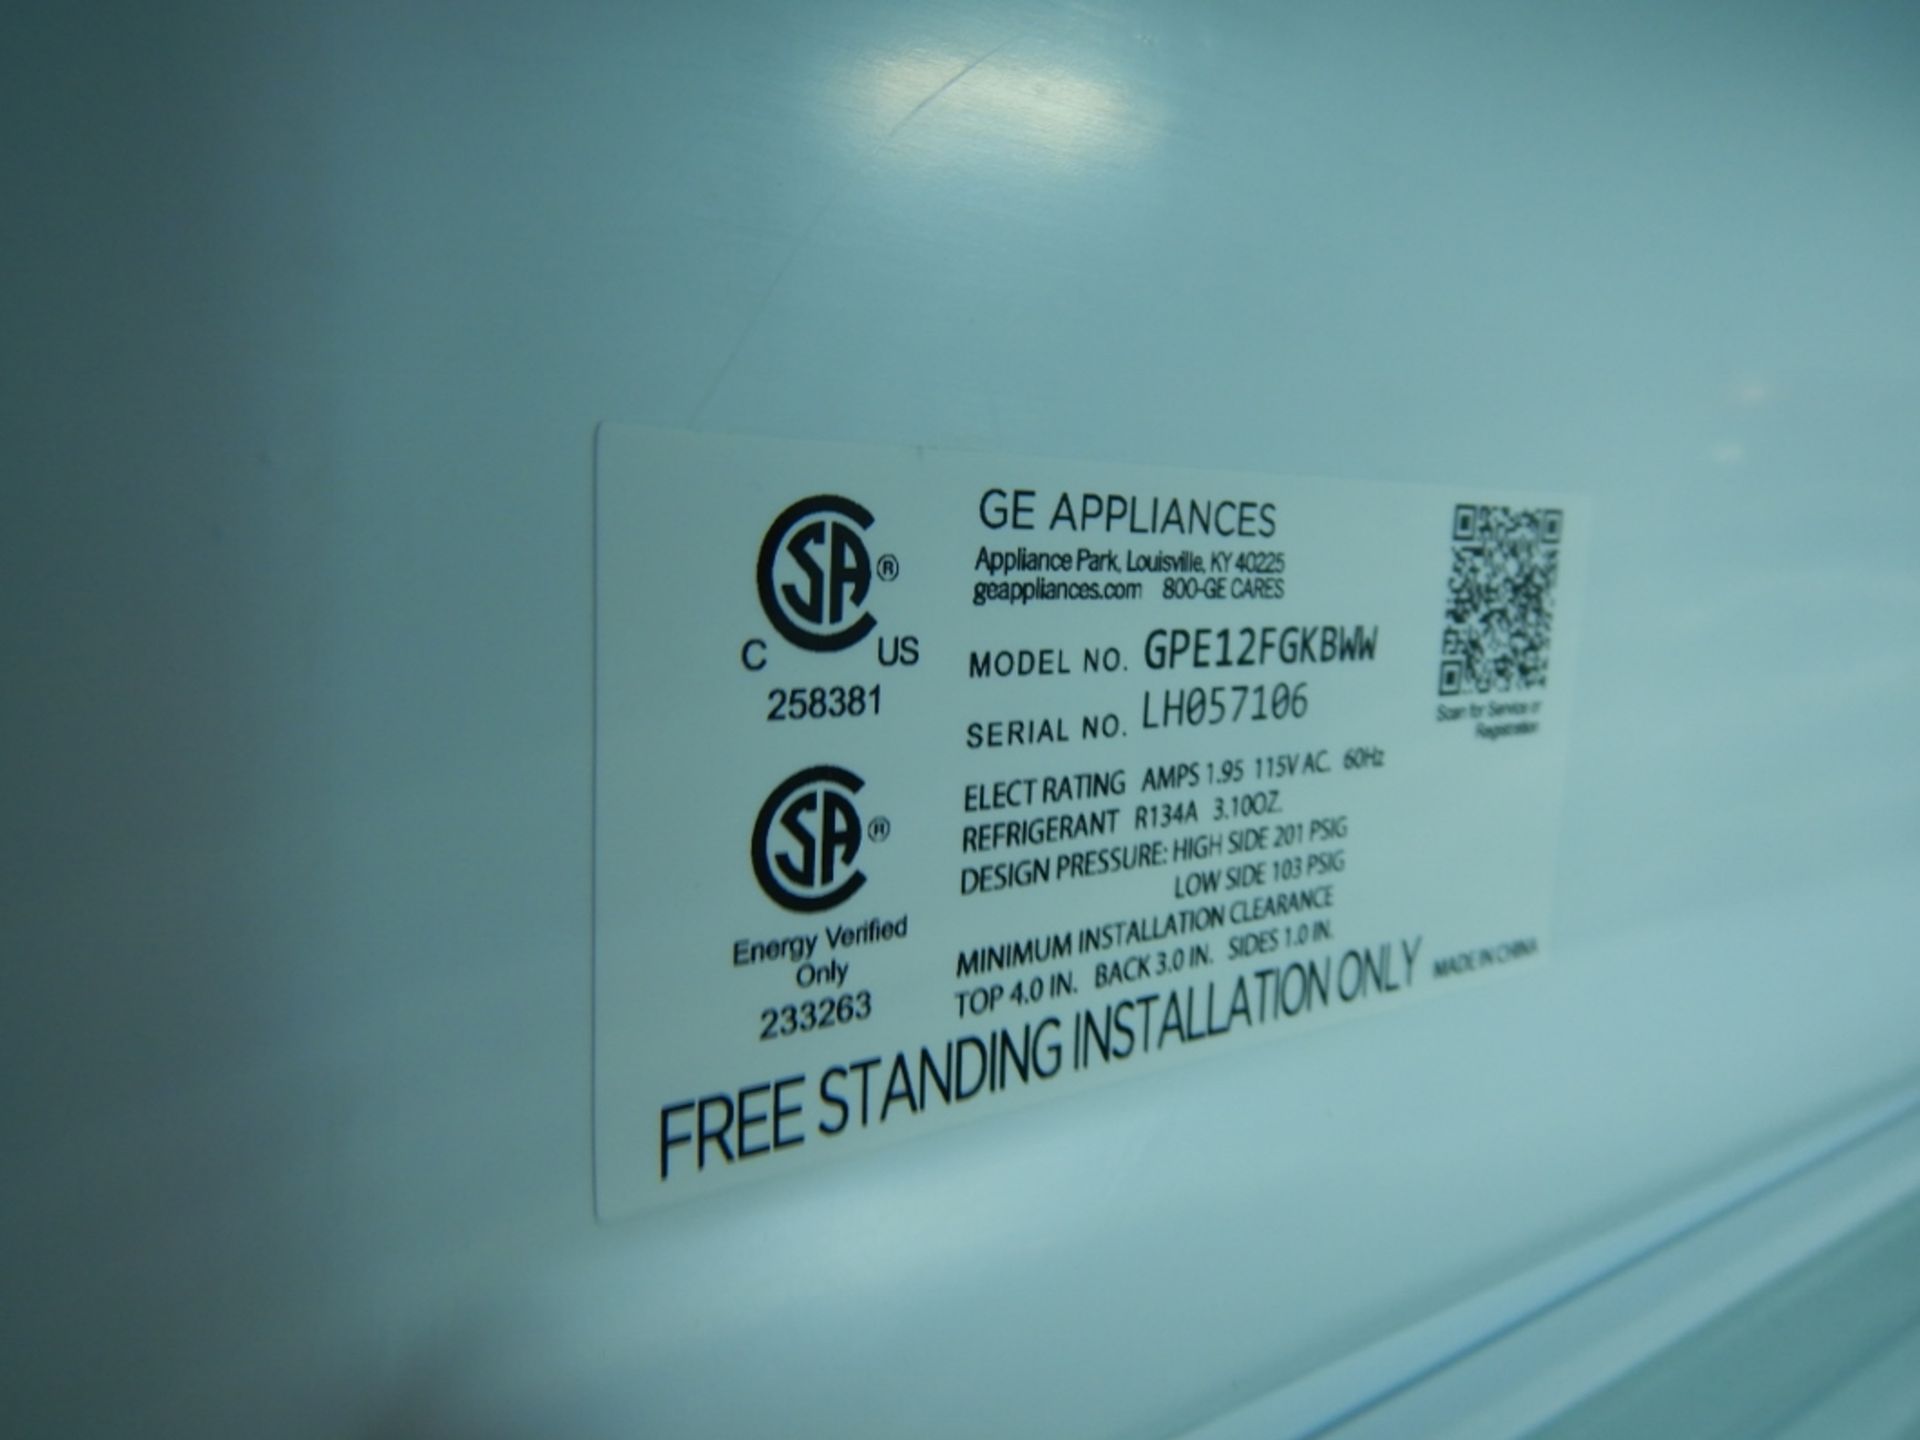 GE DOMESTIC REFRIGERATOR/FREEZER COMBO, 59.5IN H X 24.5IN W X 28IN D, MOD. V20NAB, S/N LH057106 - Image 5 of 5